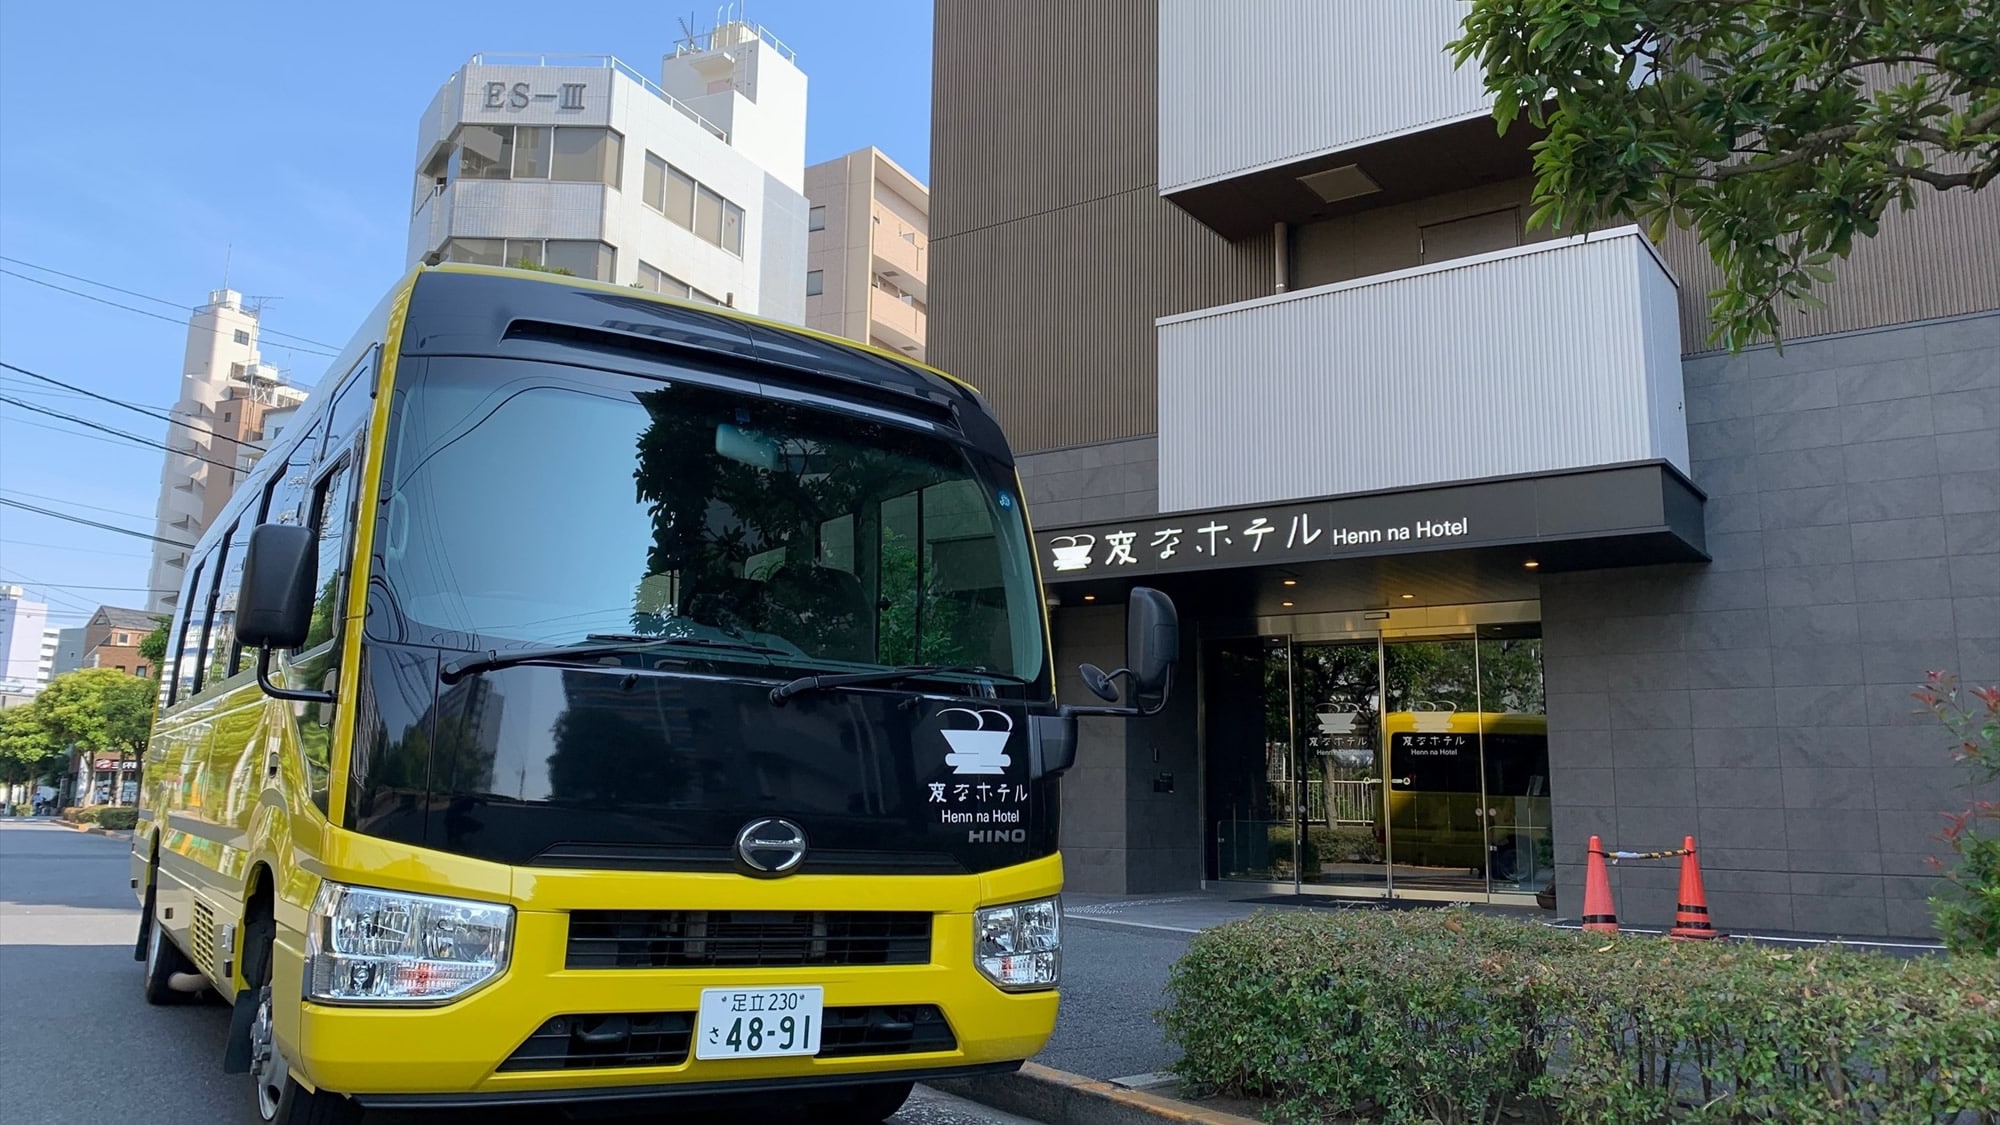 A free shuttle bus to Tokyo Disney Resort (about 30 minutes) runs every day!